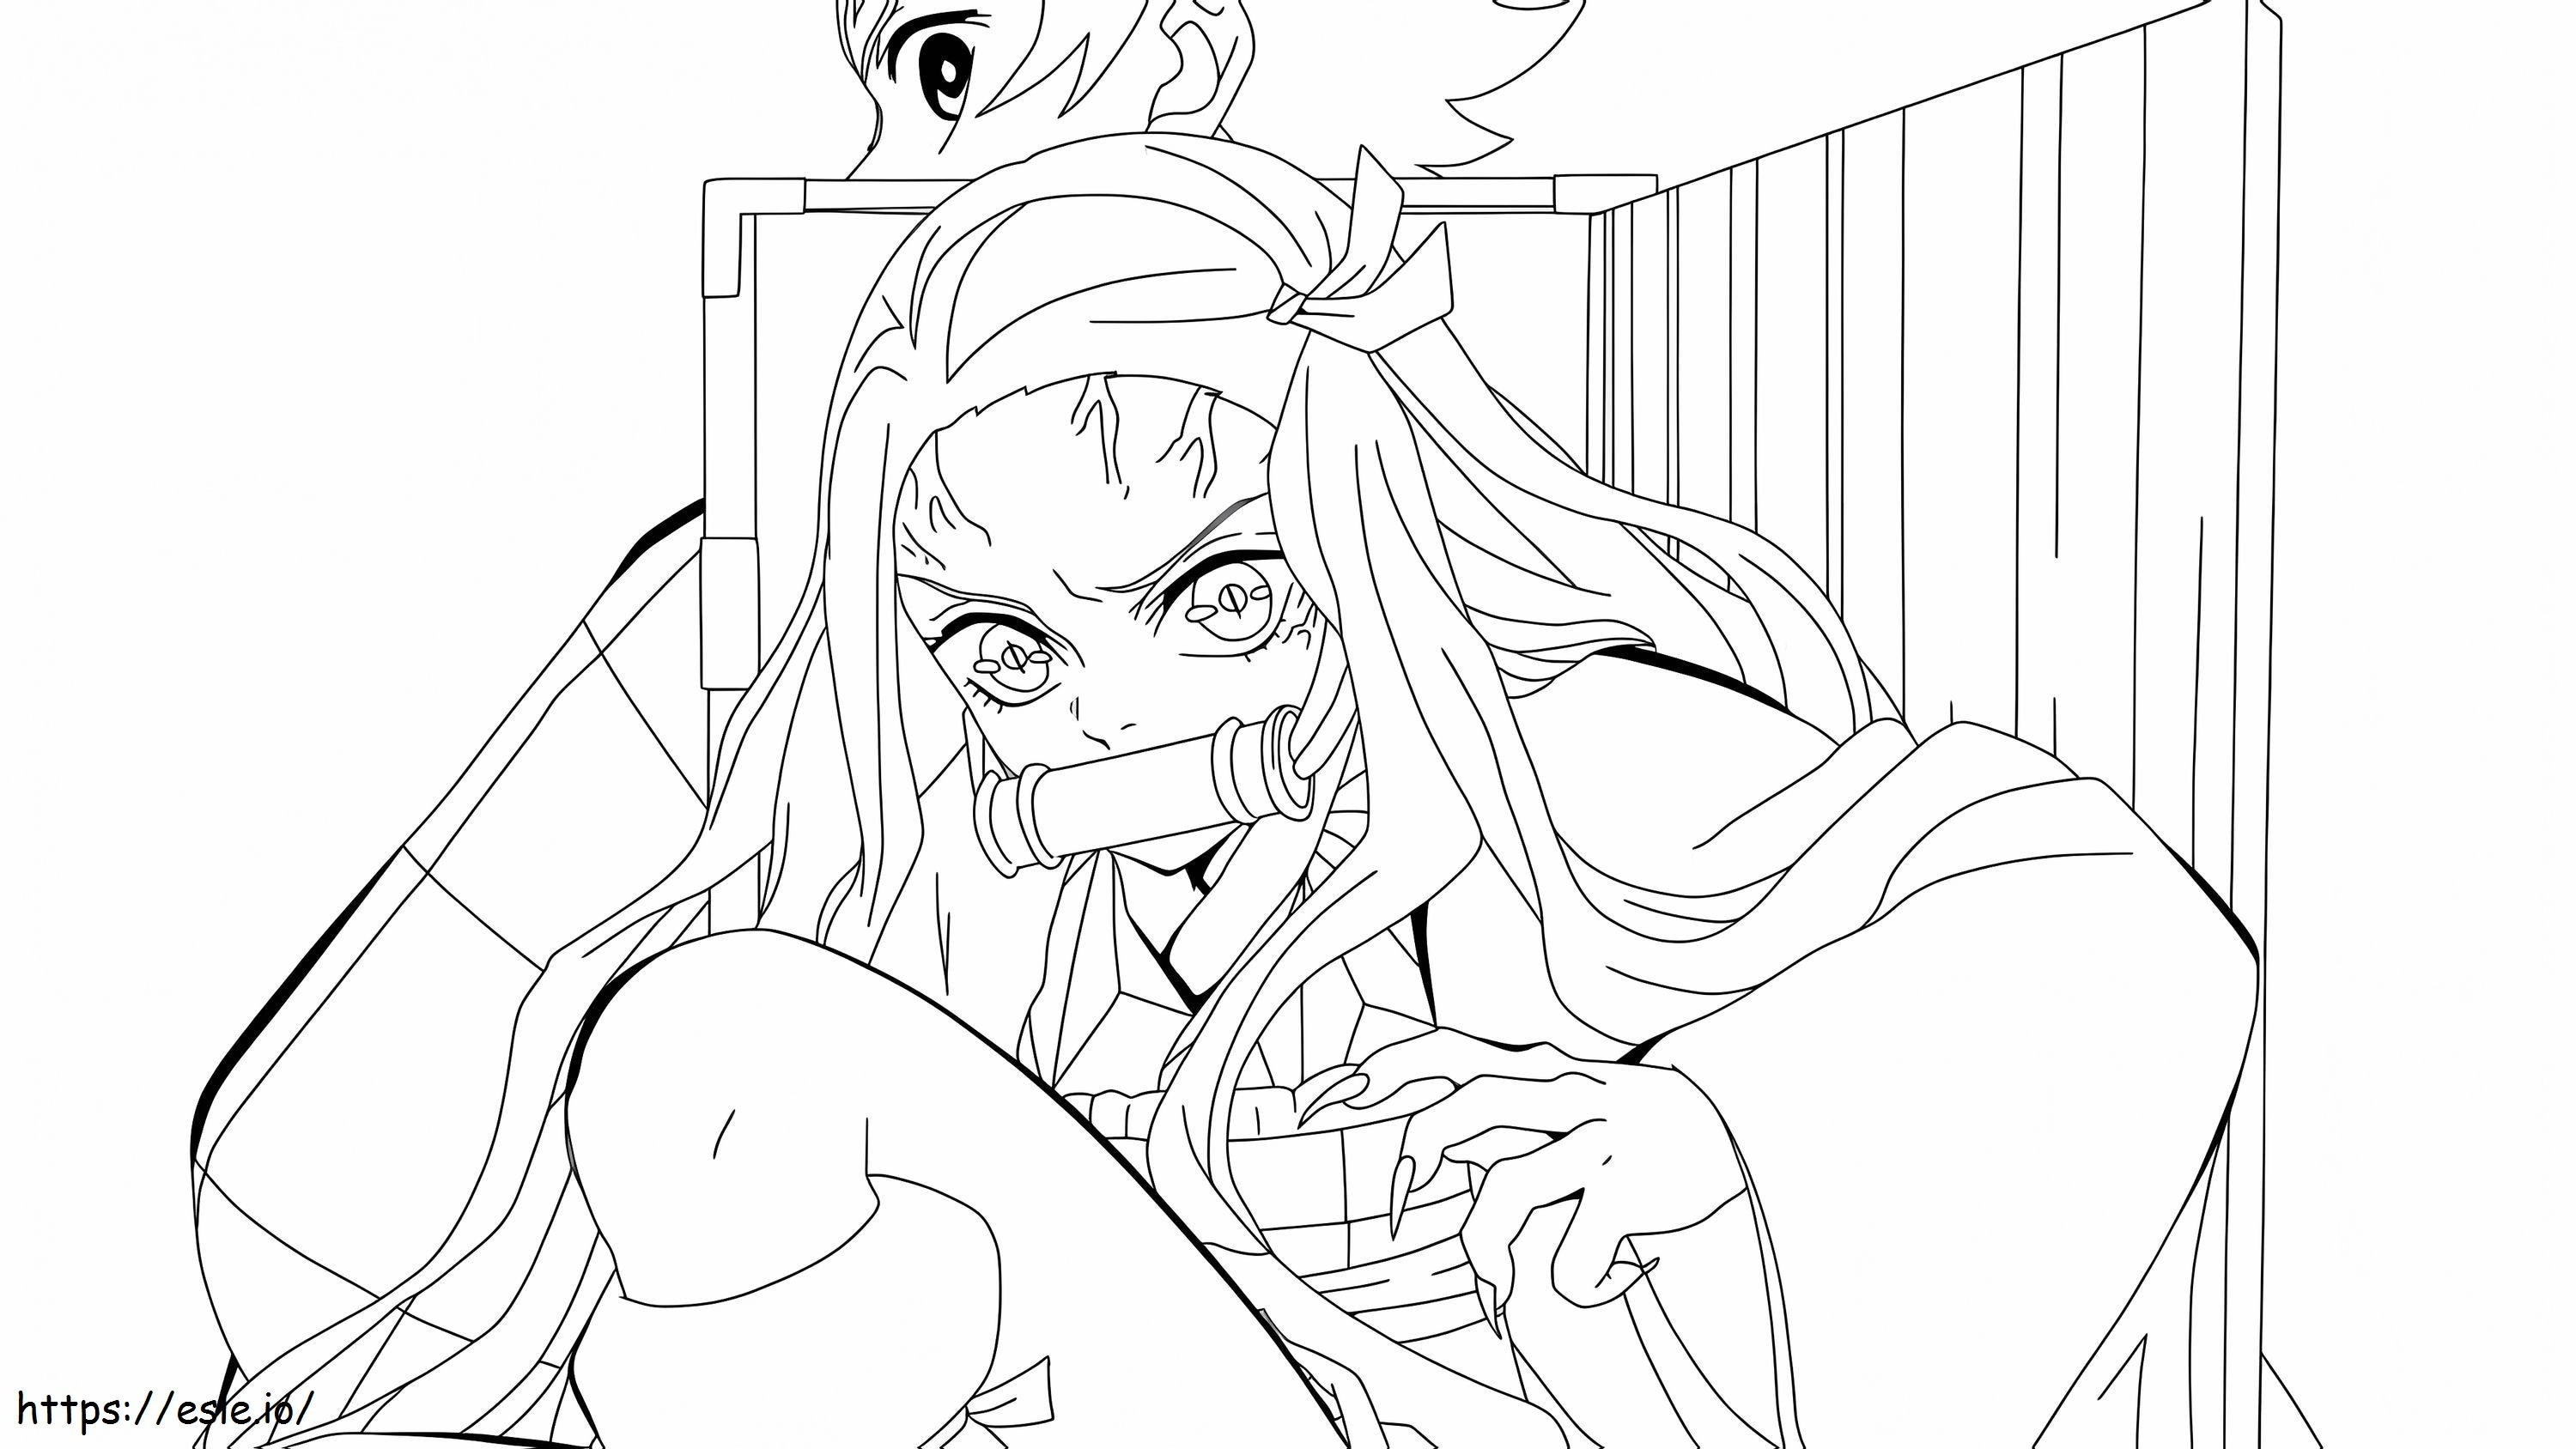 Nezuko Angry coloring page